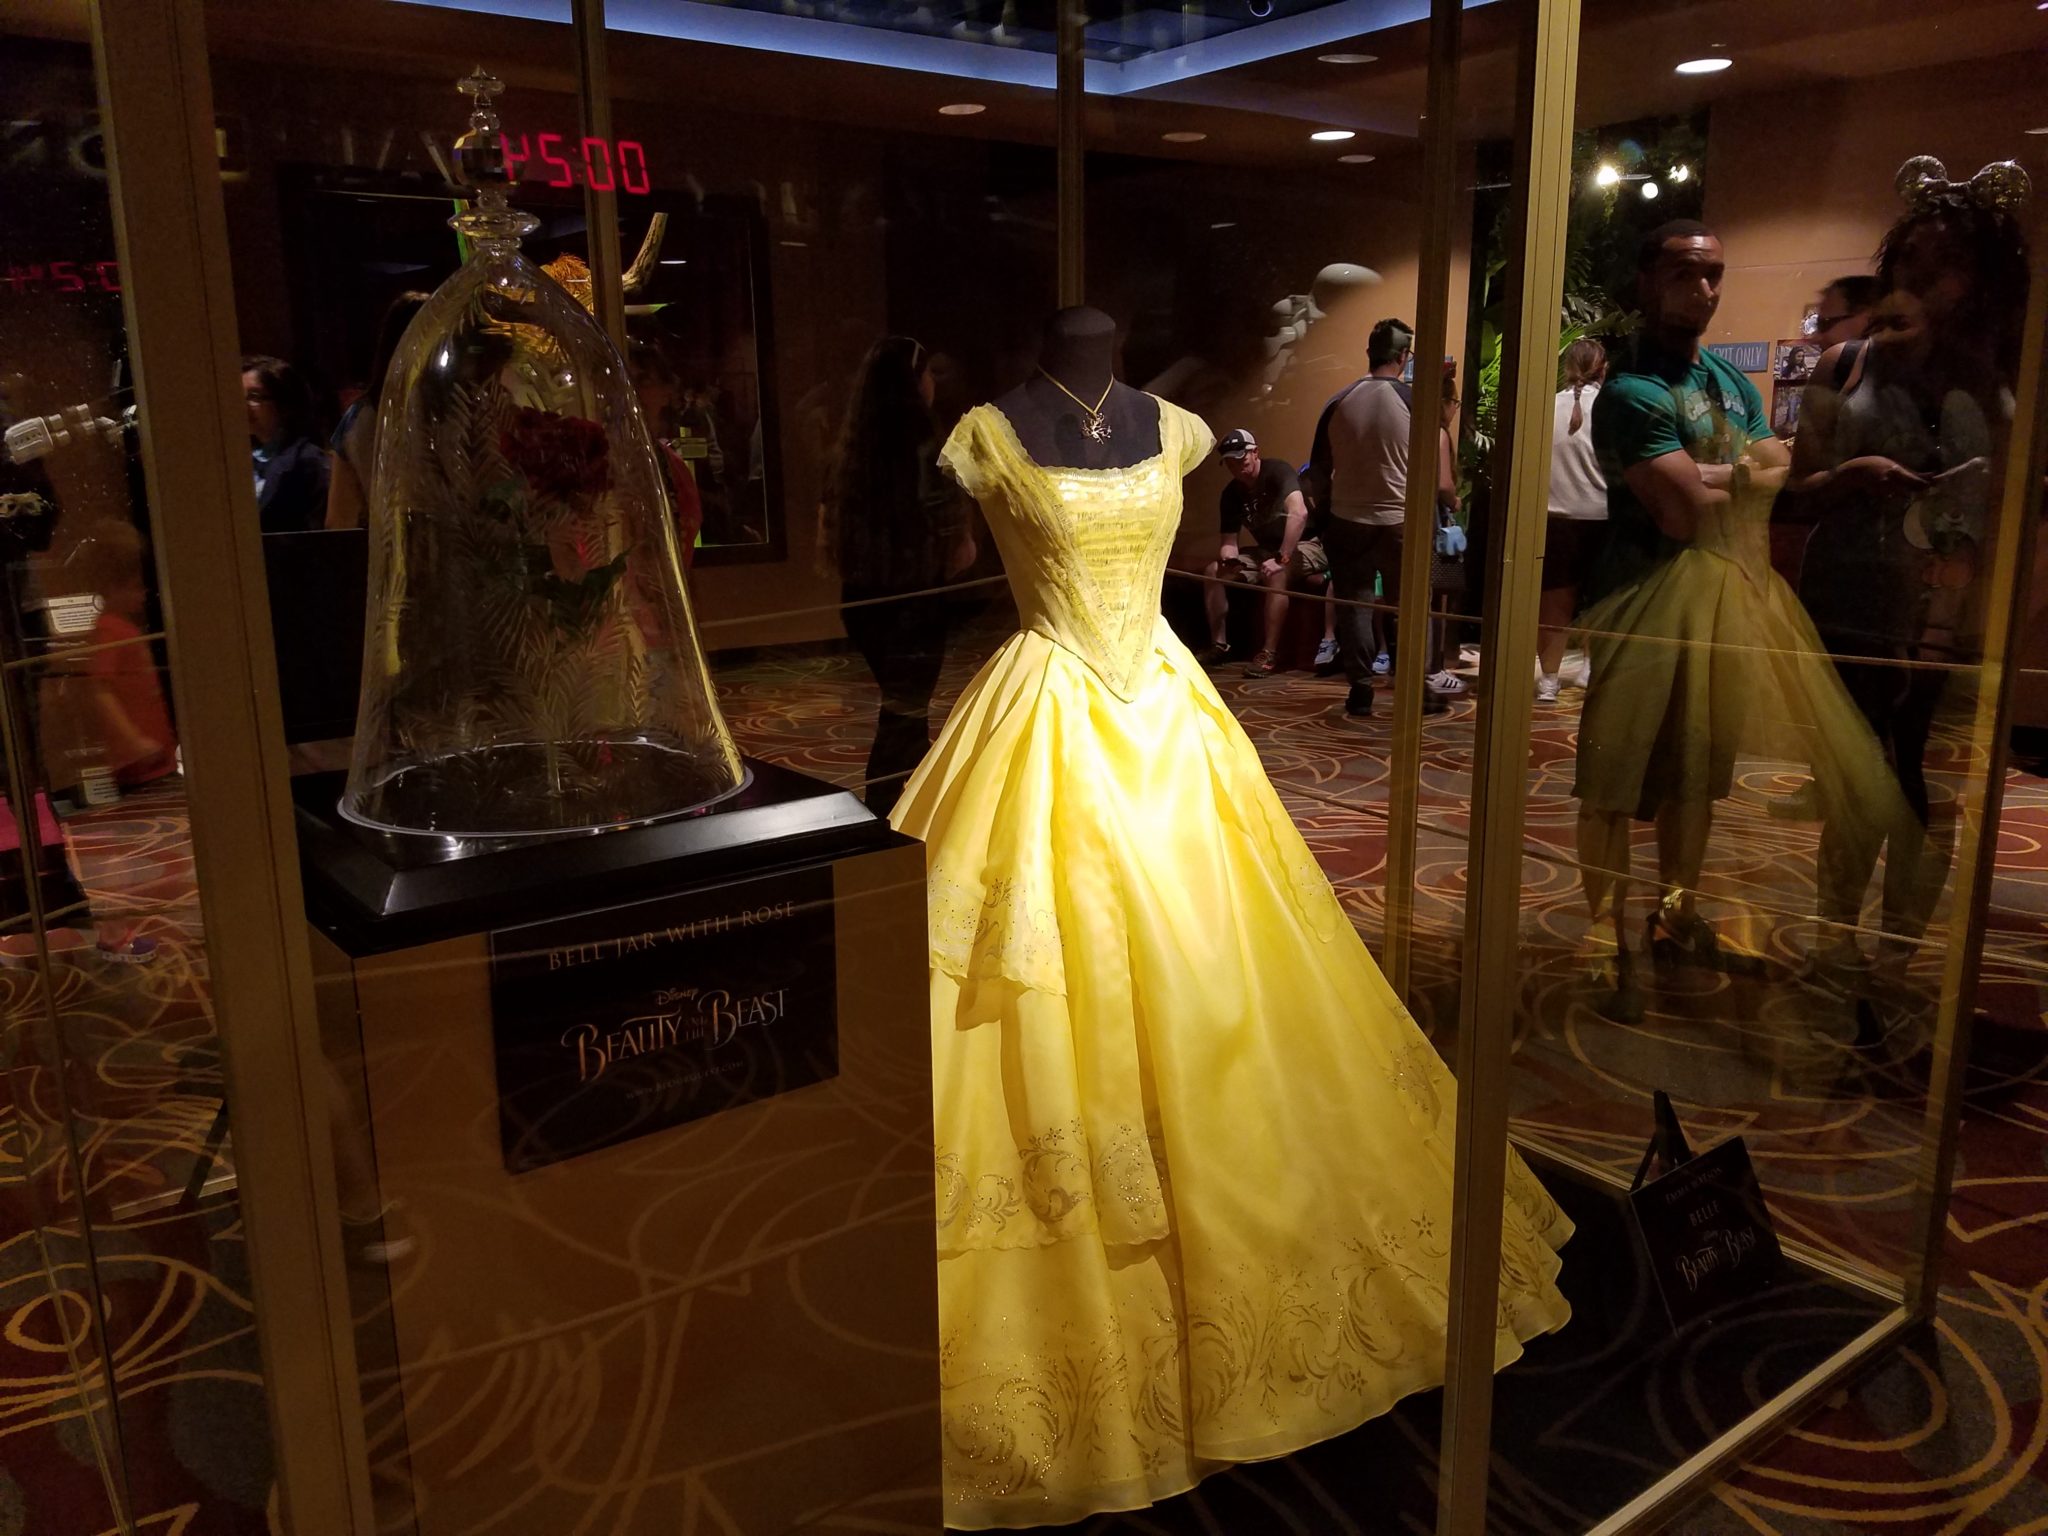 Beauty and the Beast Sneak Peek and Costume Dress On Display at One Man’s Dream